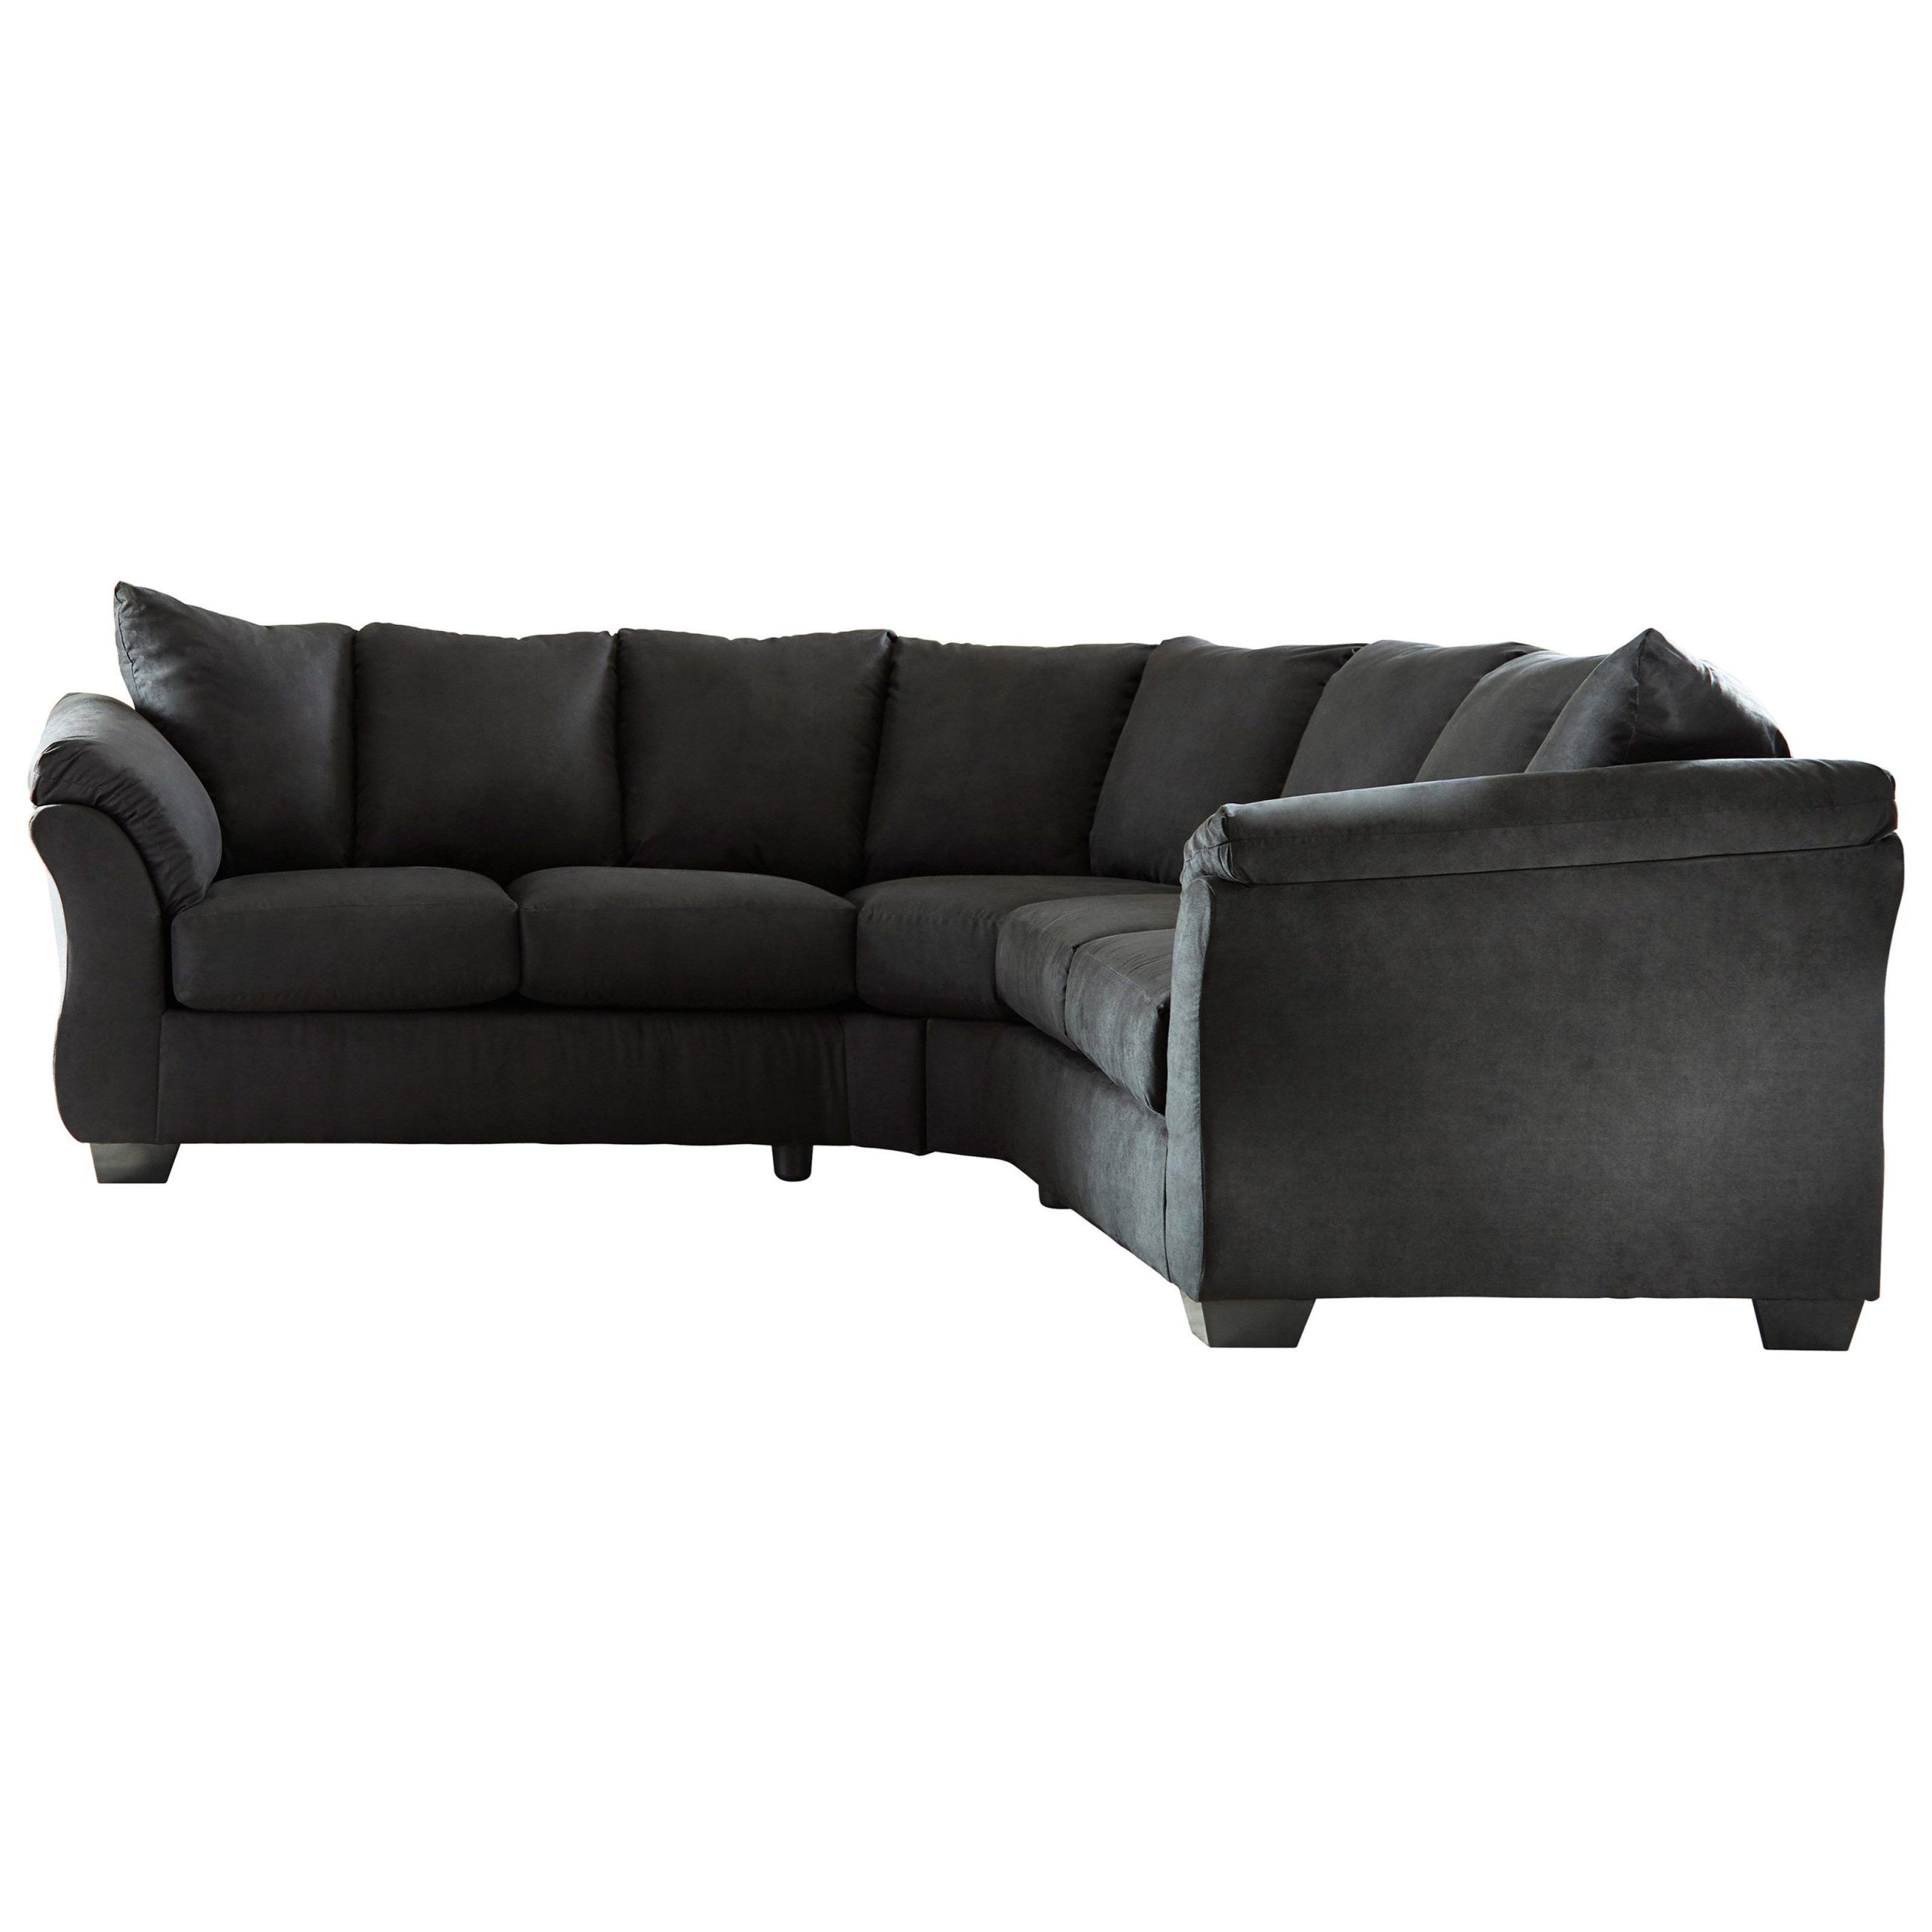 Contemporary Sectional Sofa With Sweeping Pillow Arms 104" X 104" Black Within 104" Sectional Sofas (View 5 of 15)